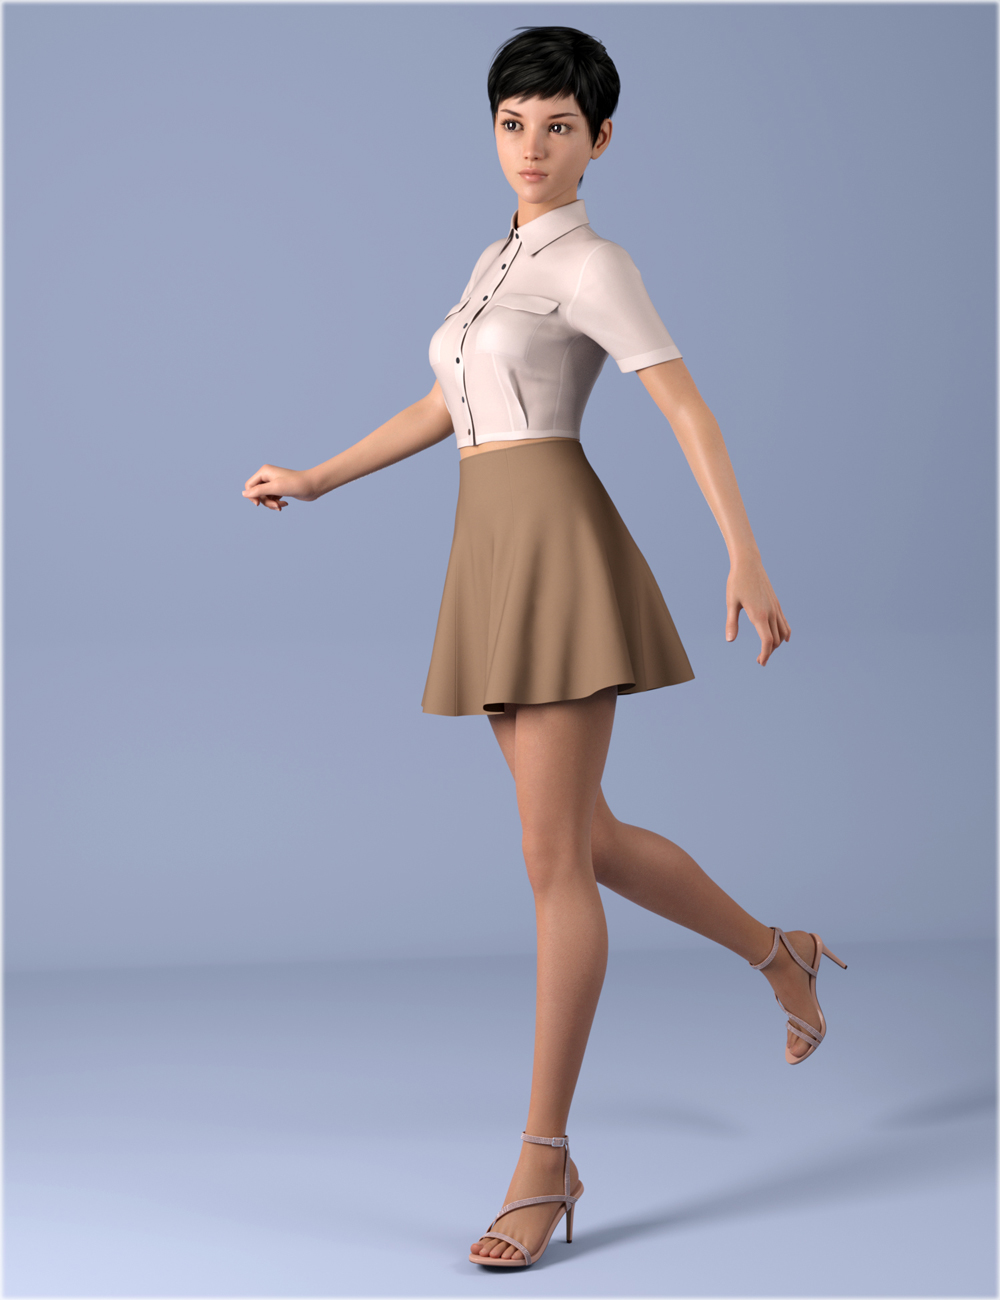 dForce HnC Cropped Shirt Outfits for Genesis 8.1 Females